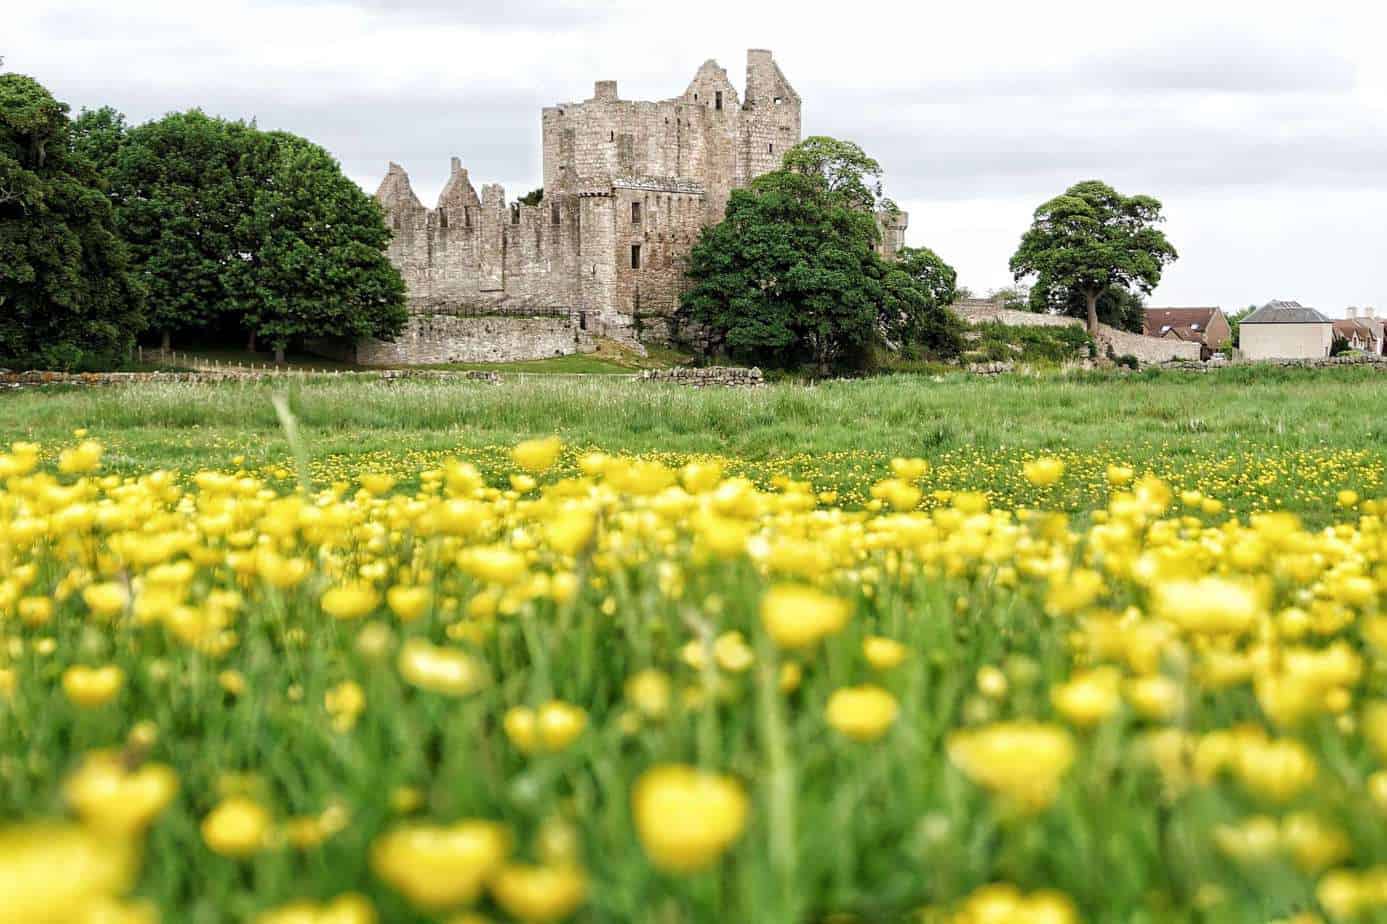 A stone castle is seen on the other side of a garden filled with yellow flowers.